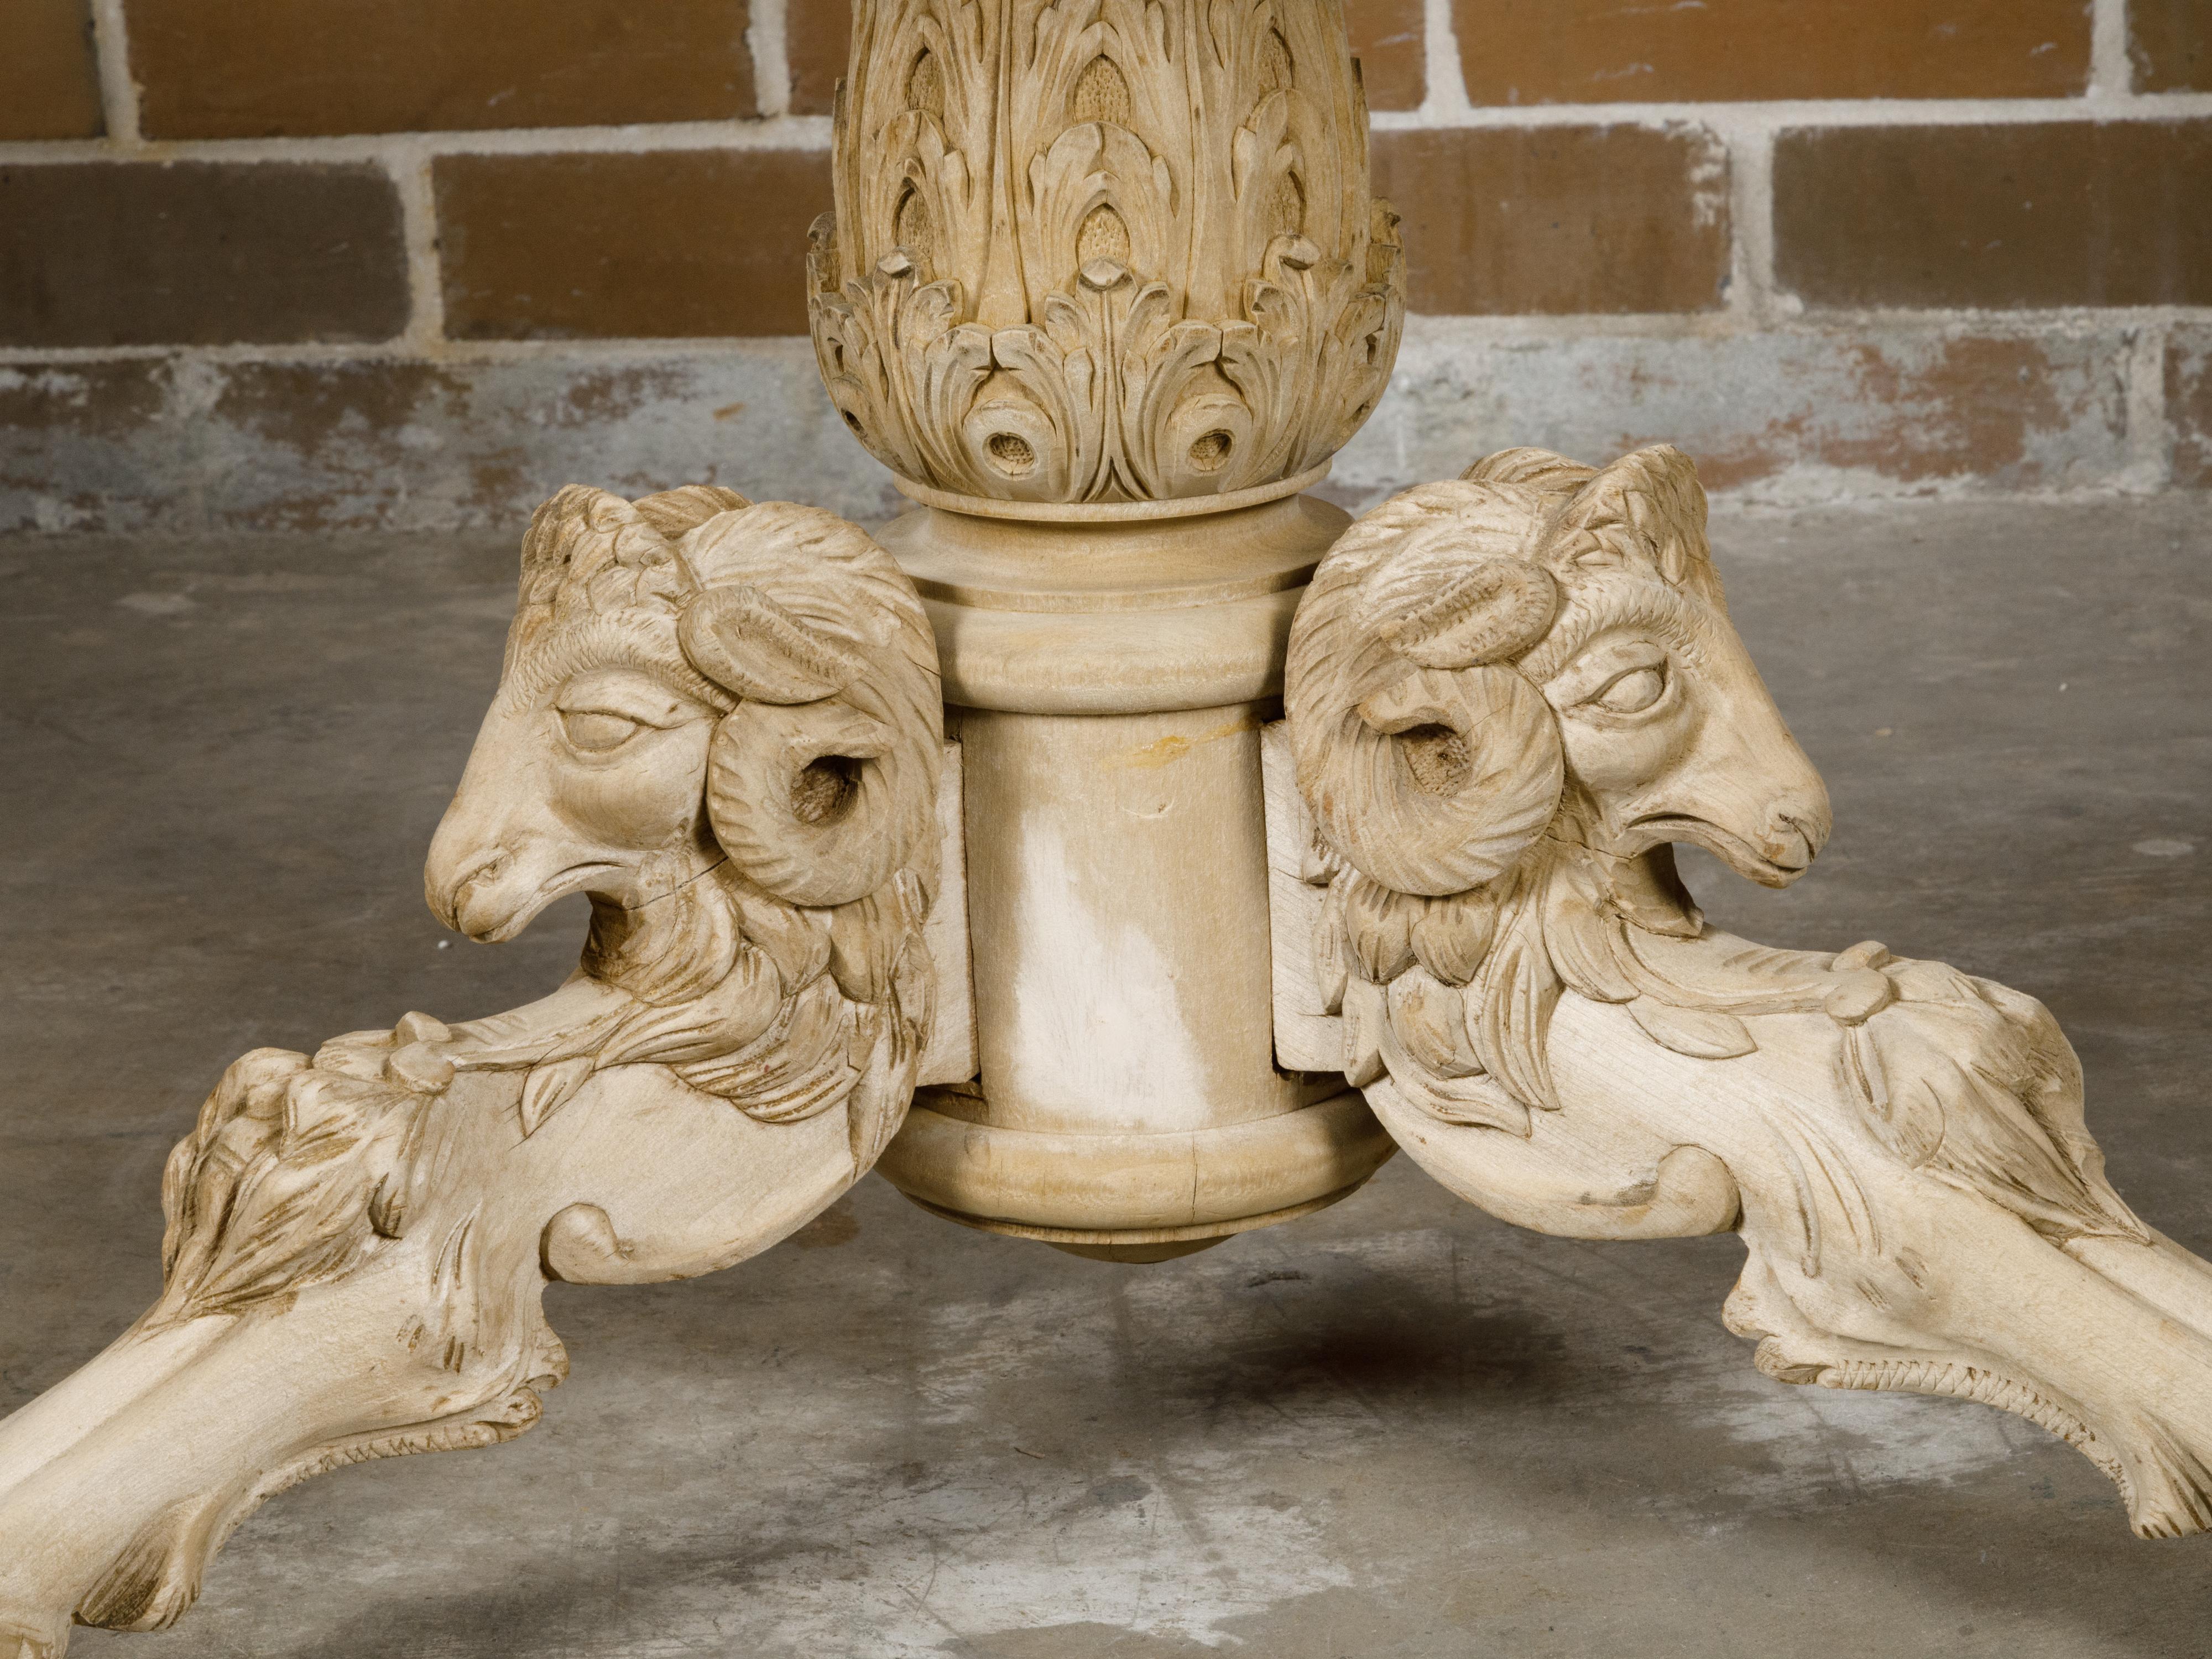 French 1900s Round Top Pedestal Table with Carved Rams' Heads and Scrollwork For Sale 6